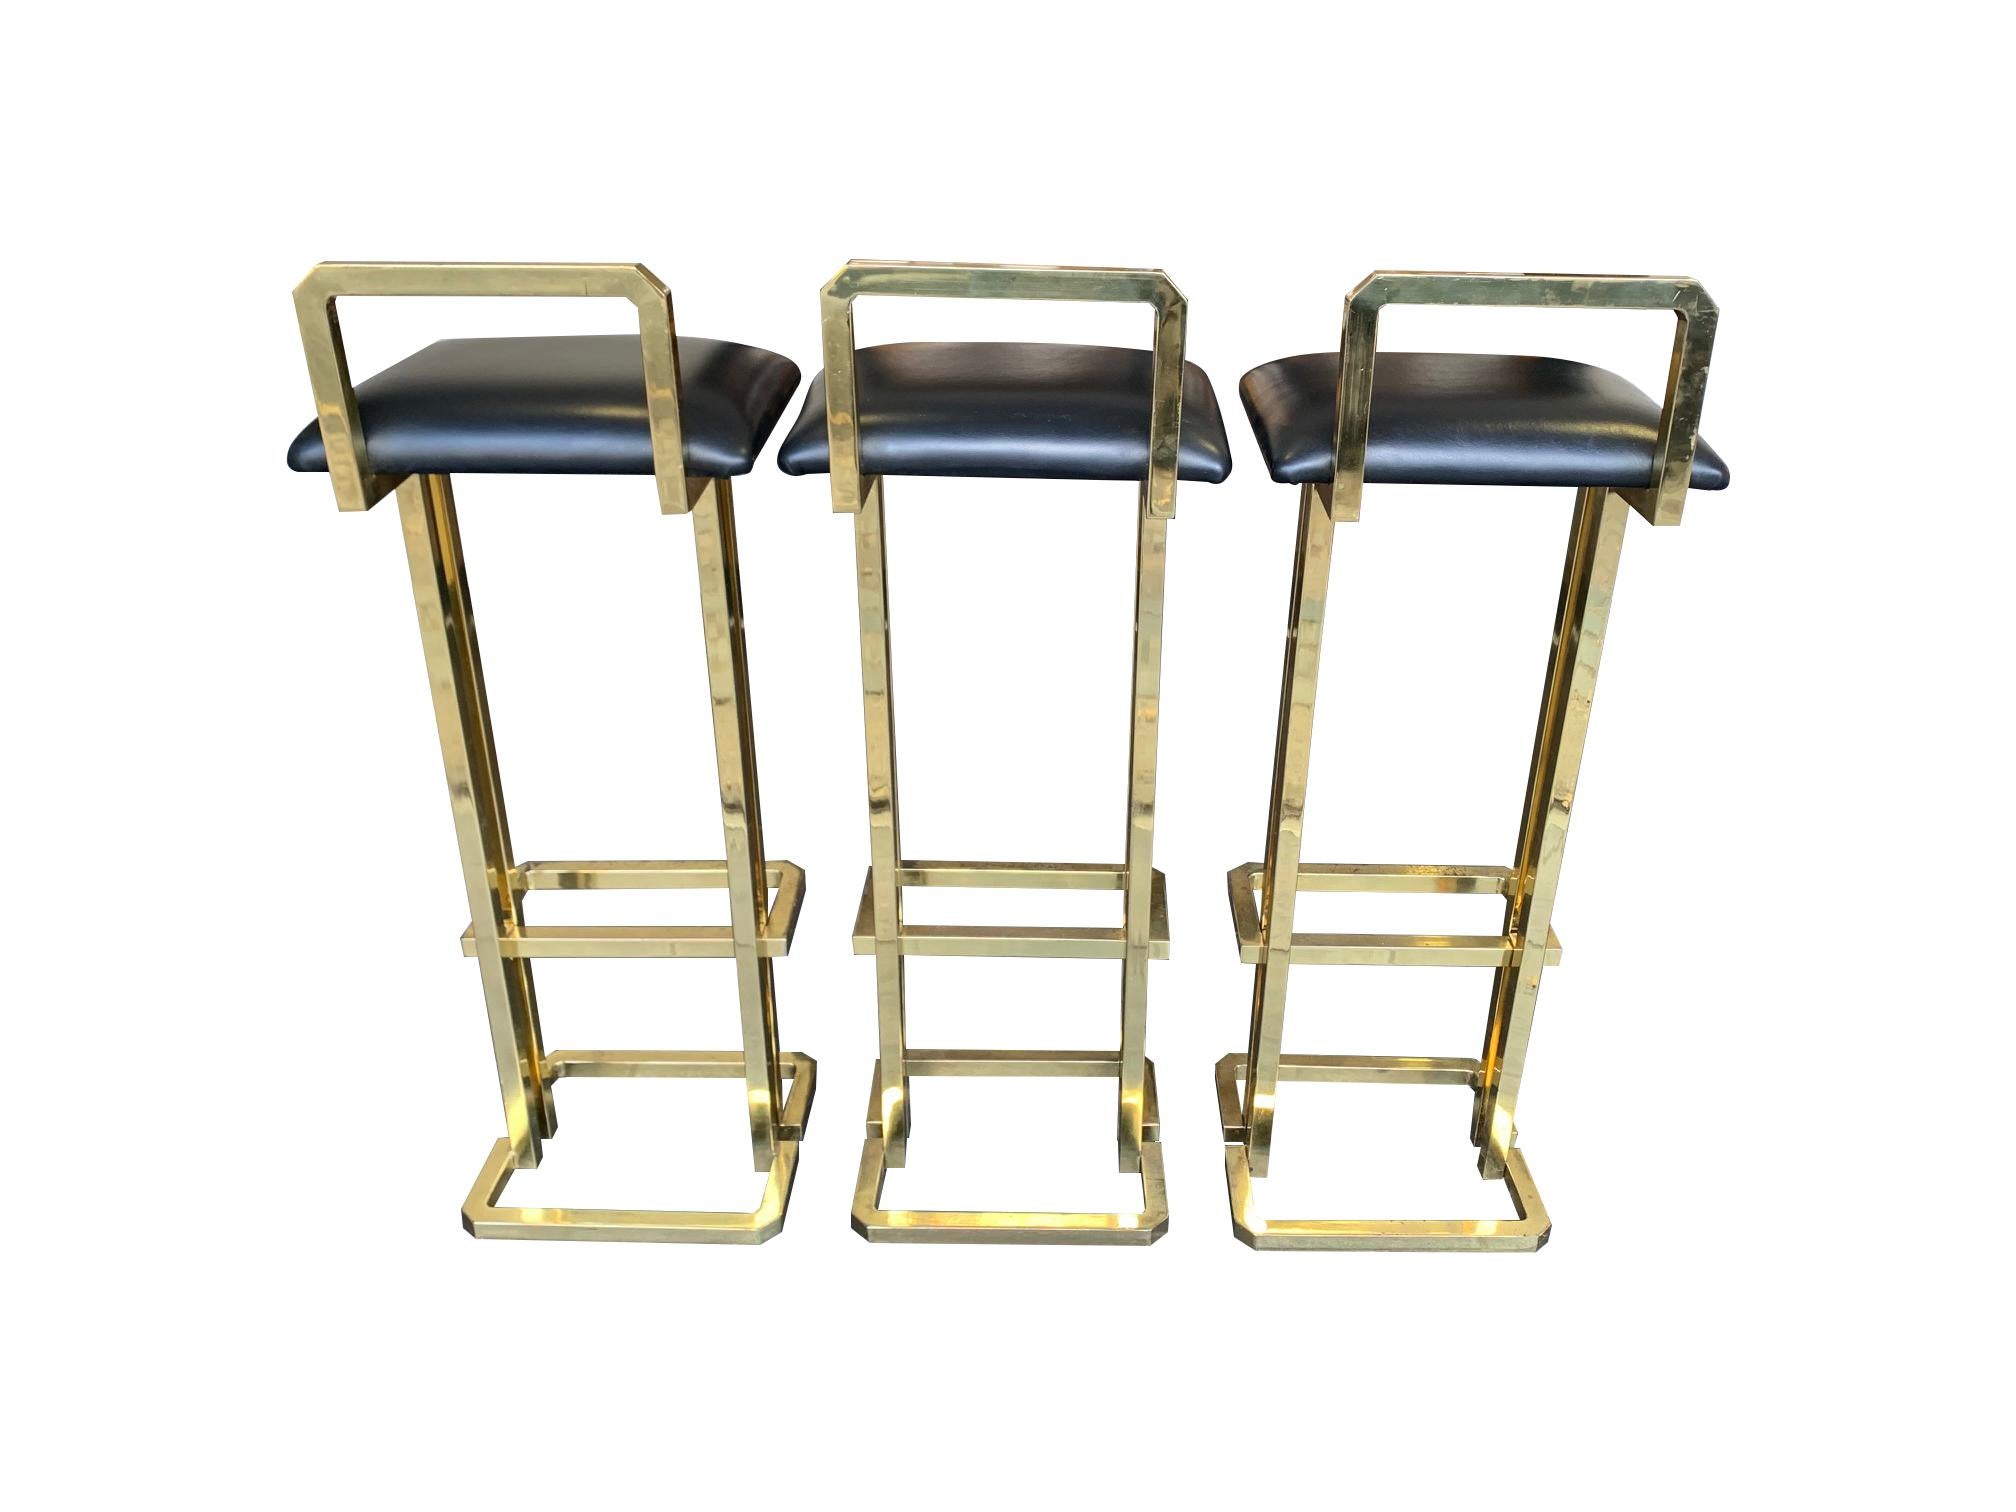 Set of 3 Maison Jansen Style Gilt Metal Stools with Black Leather Seat Pads For Sale 8